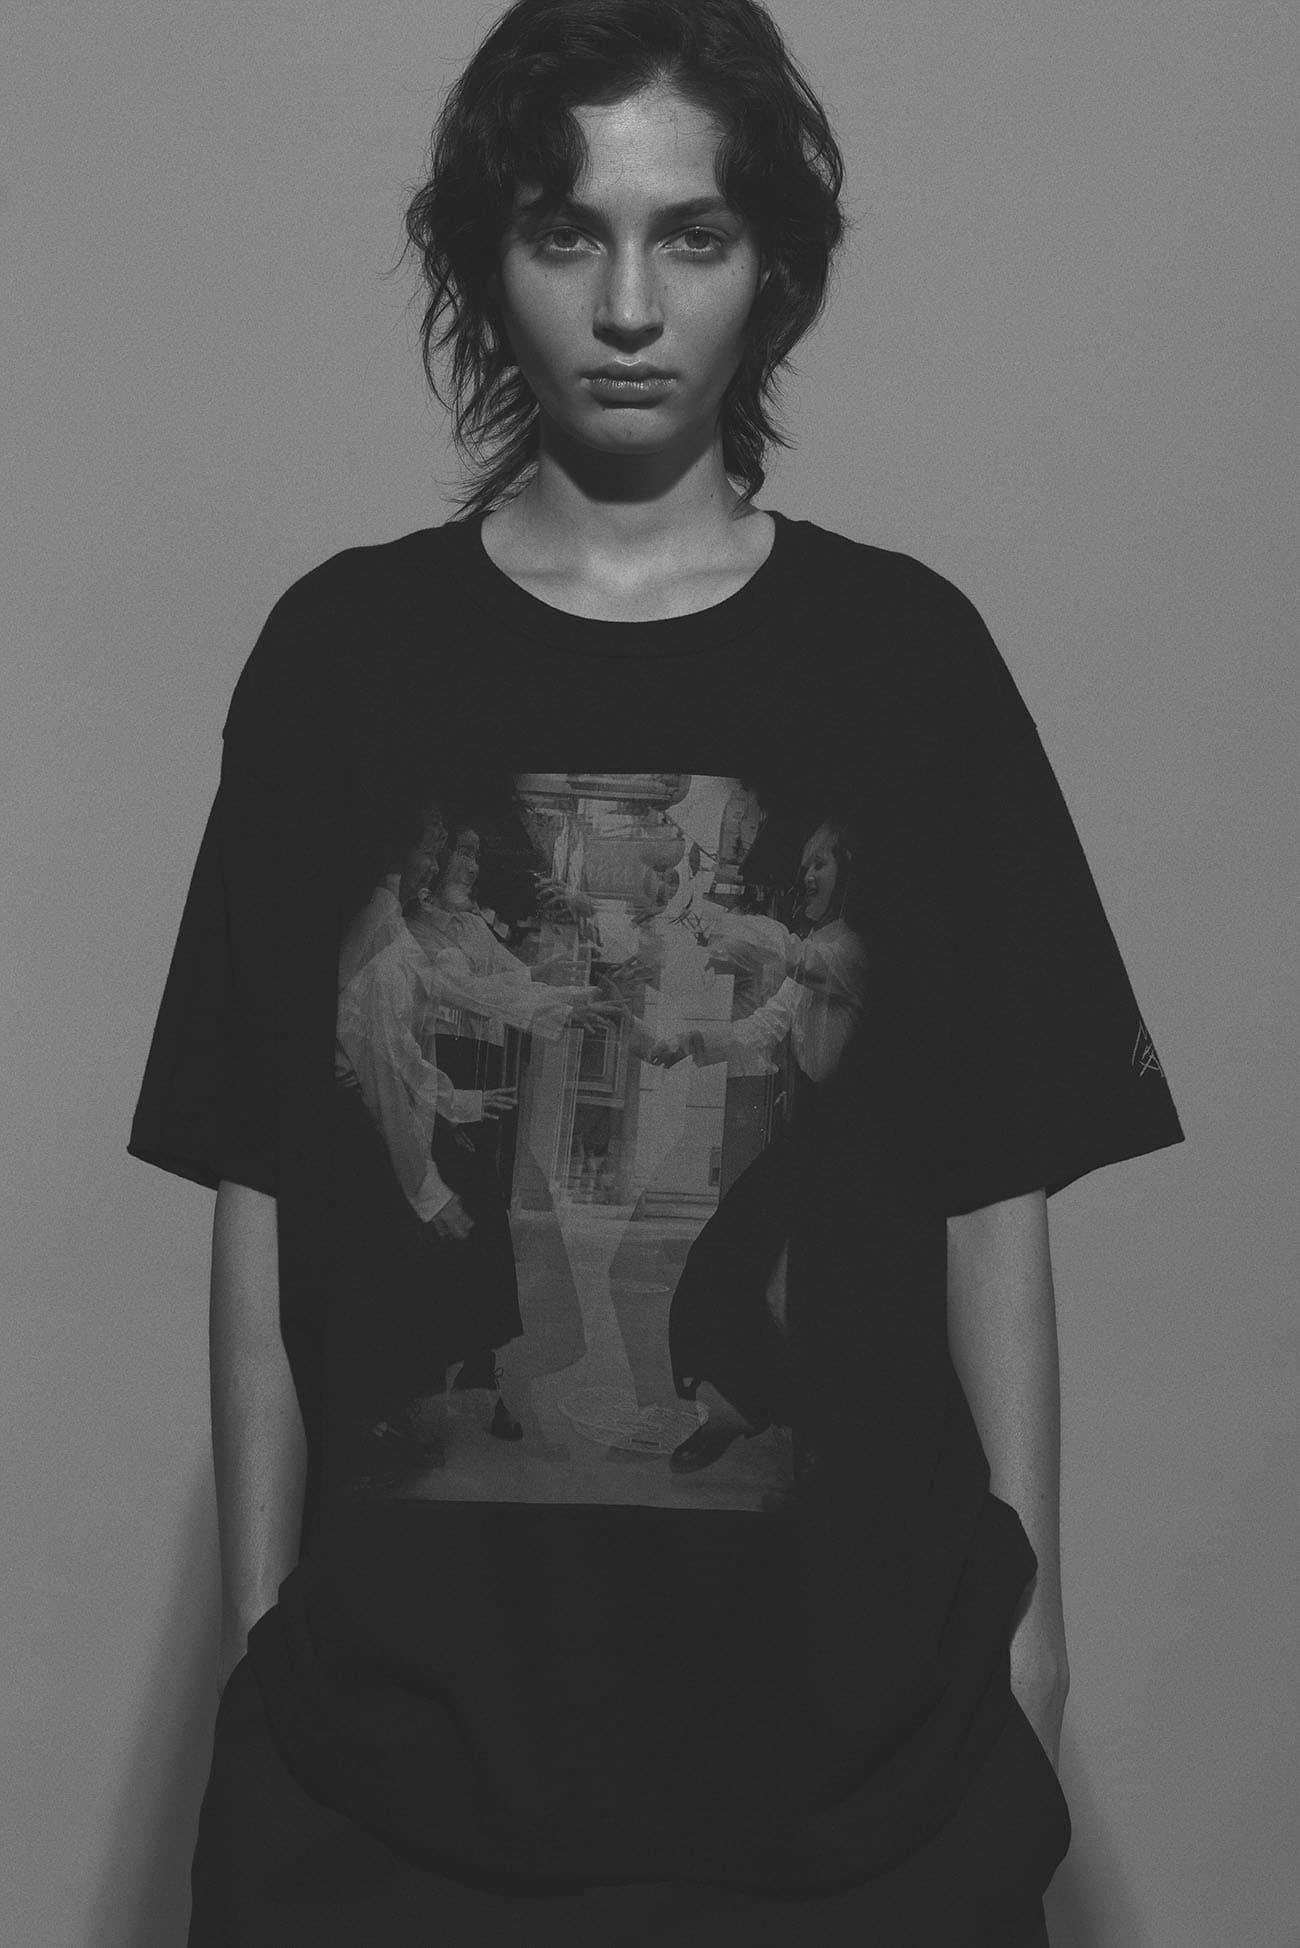 [Y's 1972 - A MOMENT IN Y's WITH MAX VADUKUL]PICTURE PIGMENT PRINT SHORT SLEEVE T